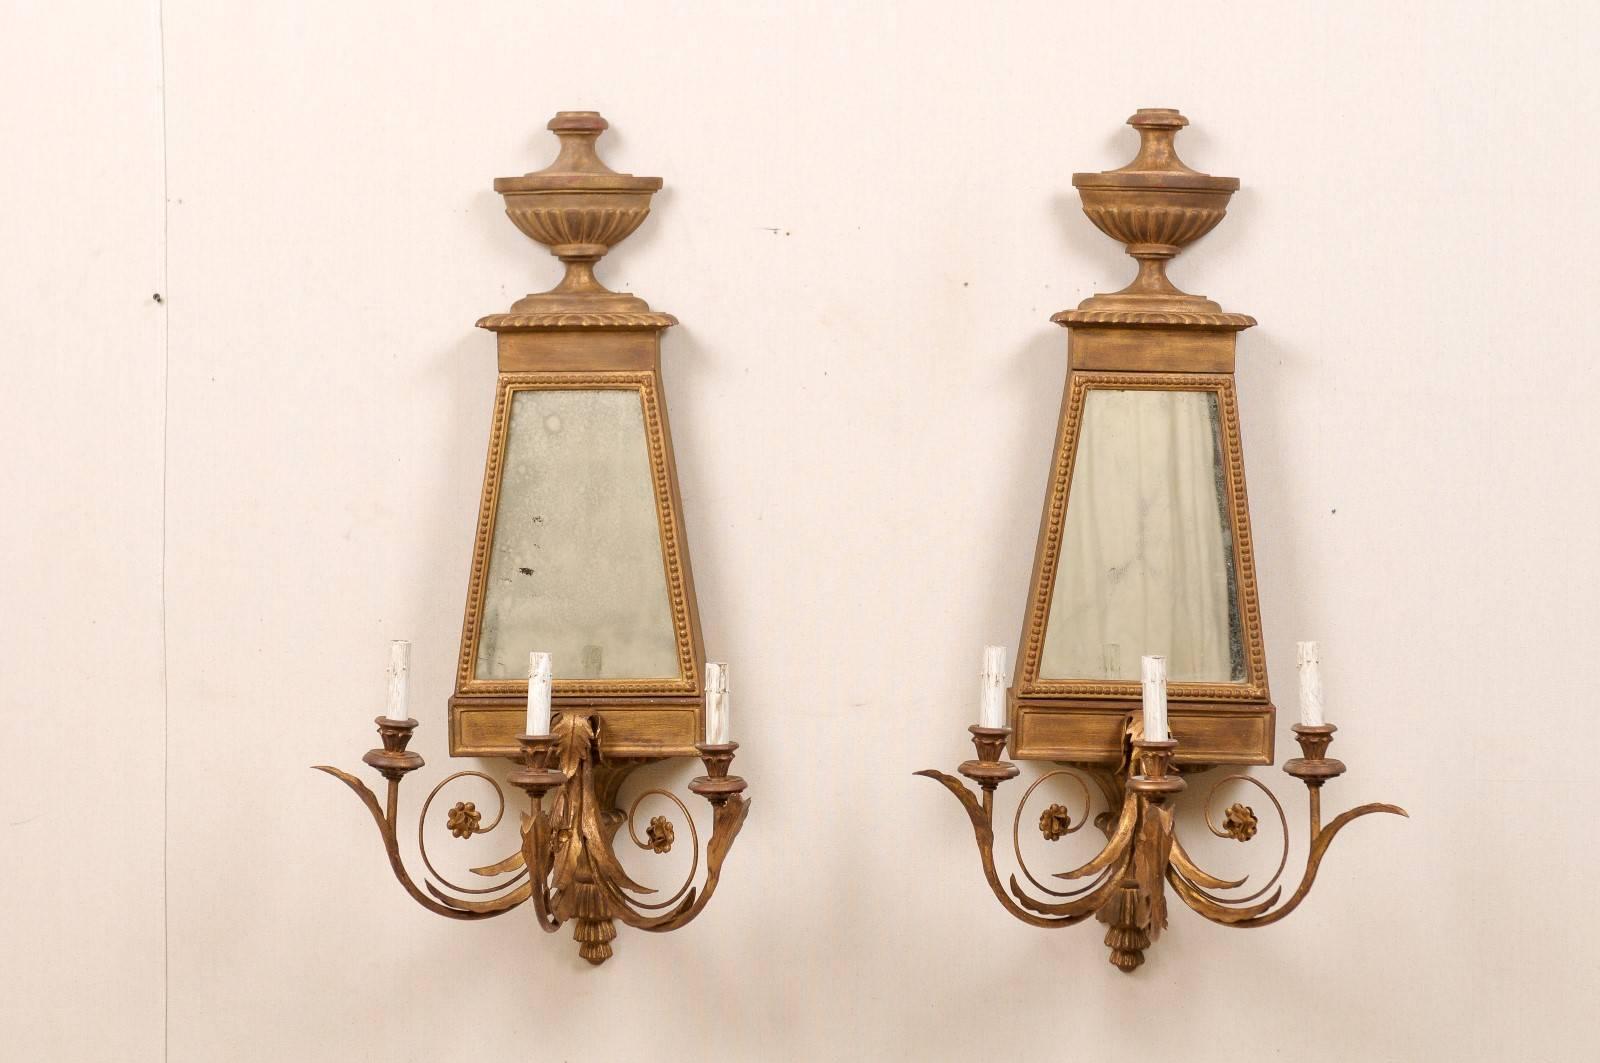 A pair of Italian vintage mirrored three-light sconces from the late 20th century. These Italian sconces are painted wood and metal and feature carved urn motifs at the top, scrolled arms with acanthus leaves motifs and mirrored back plates. The